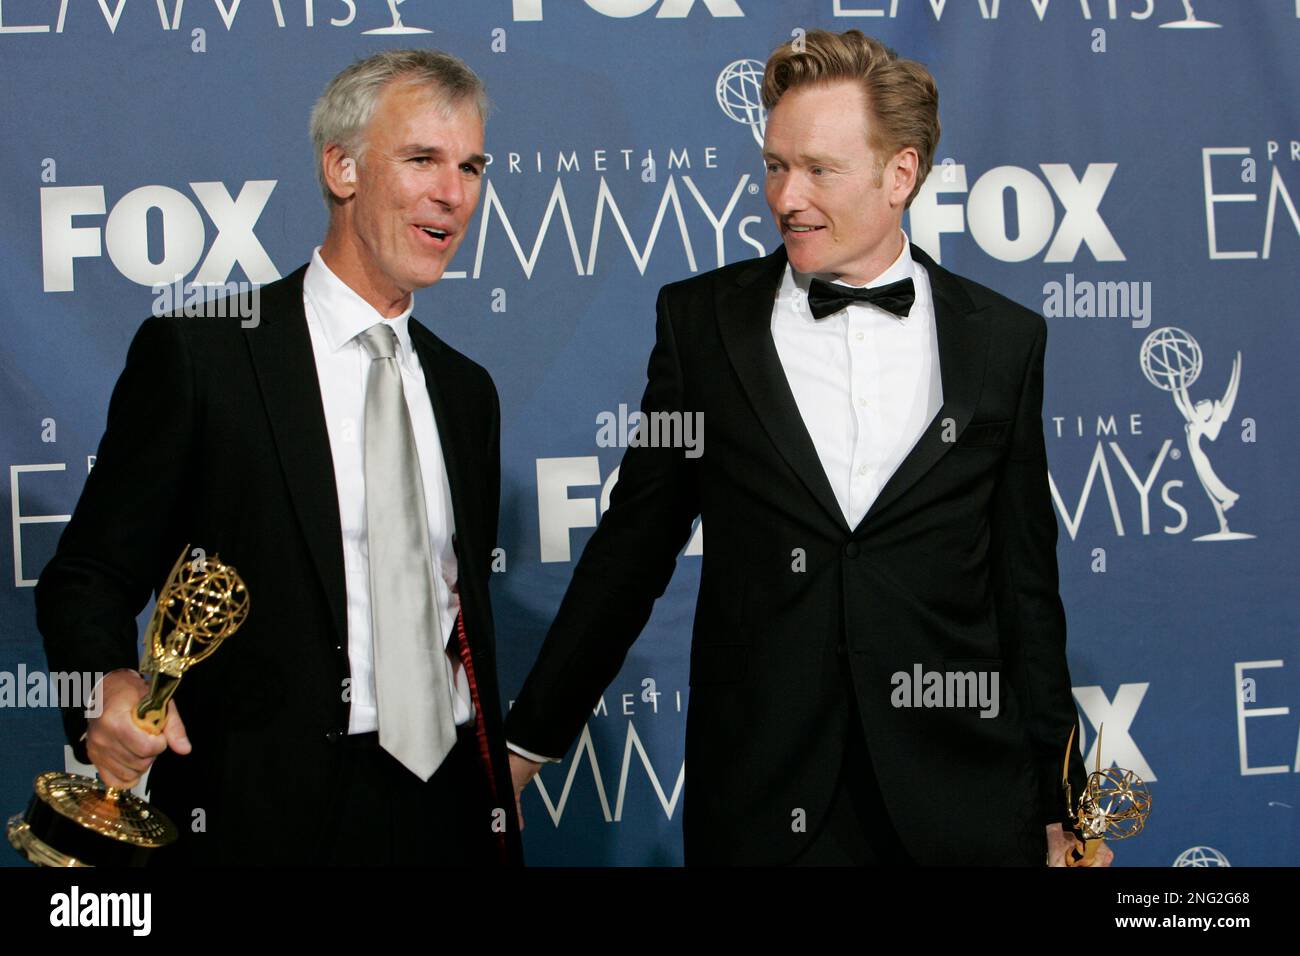 Head writer Mike Sweeney, left, and Conan O'Brien hold their